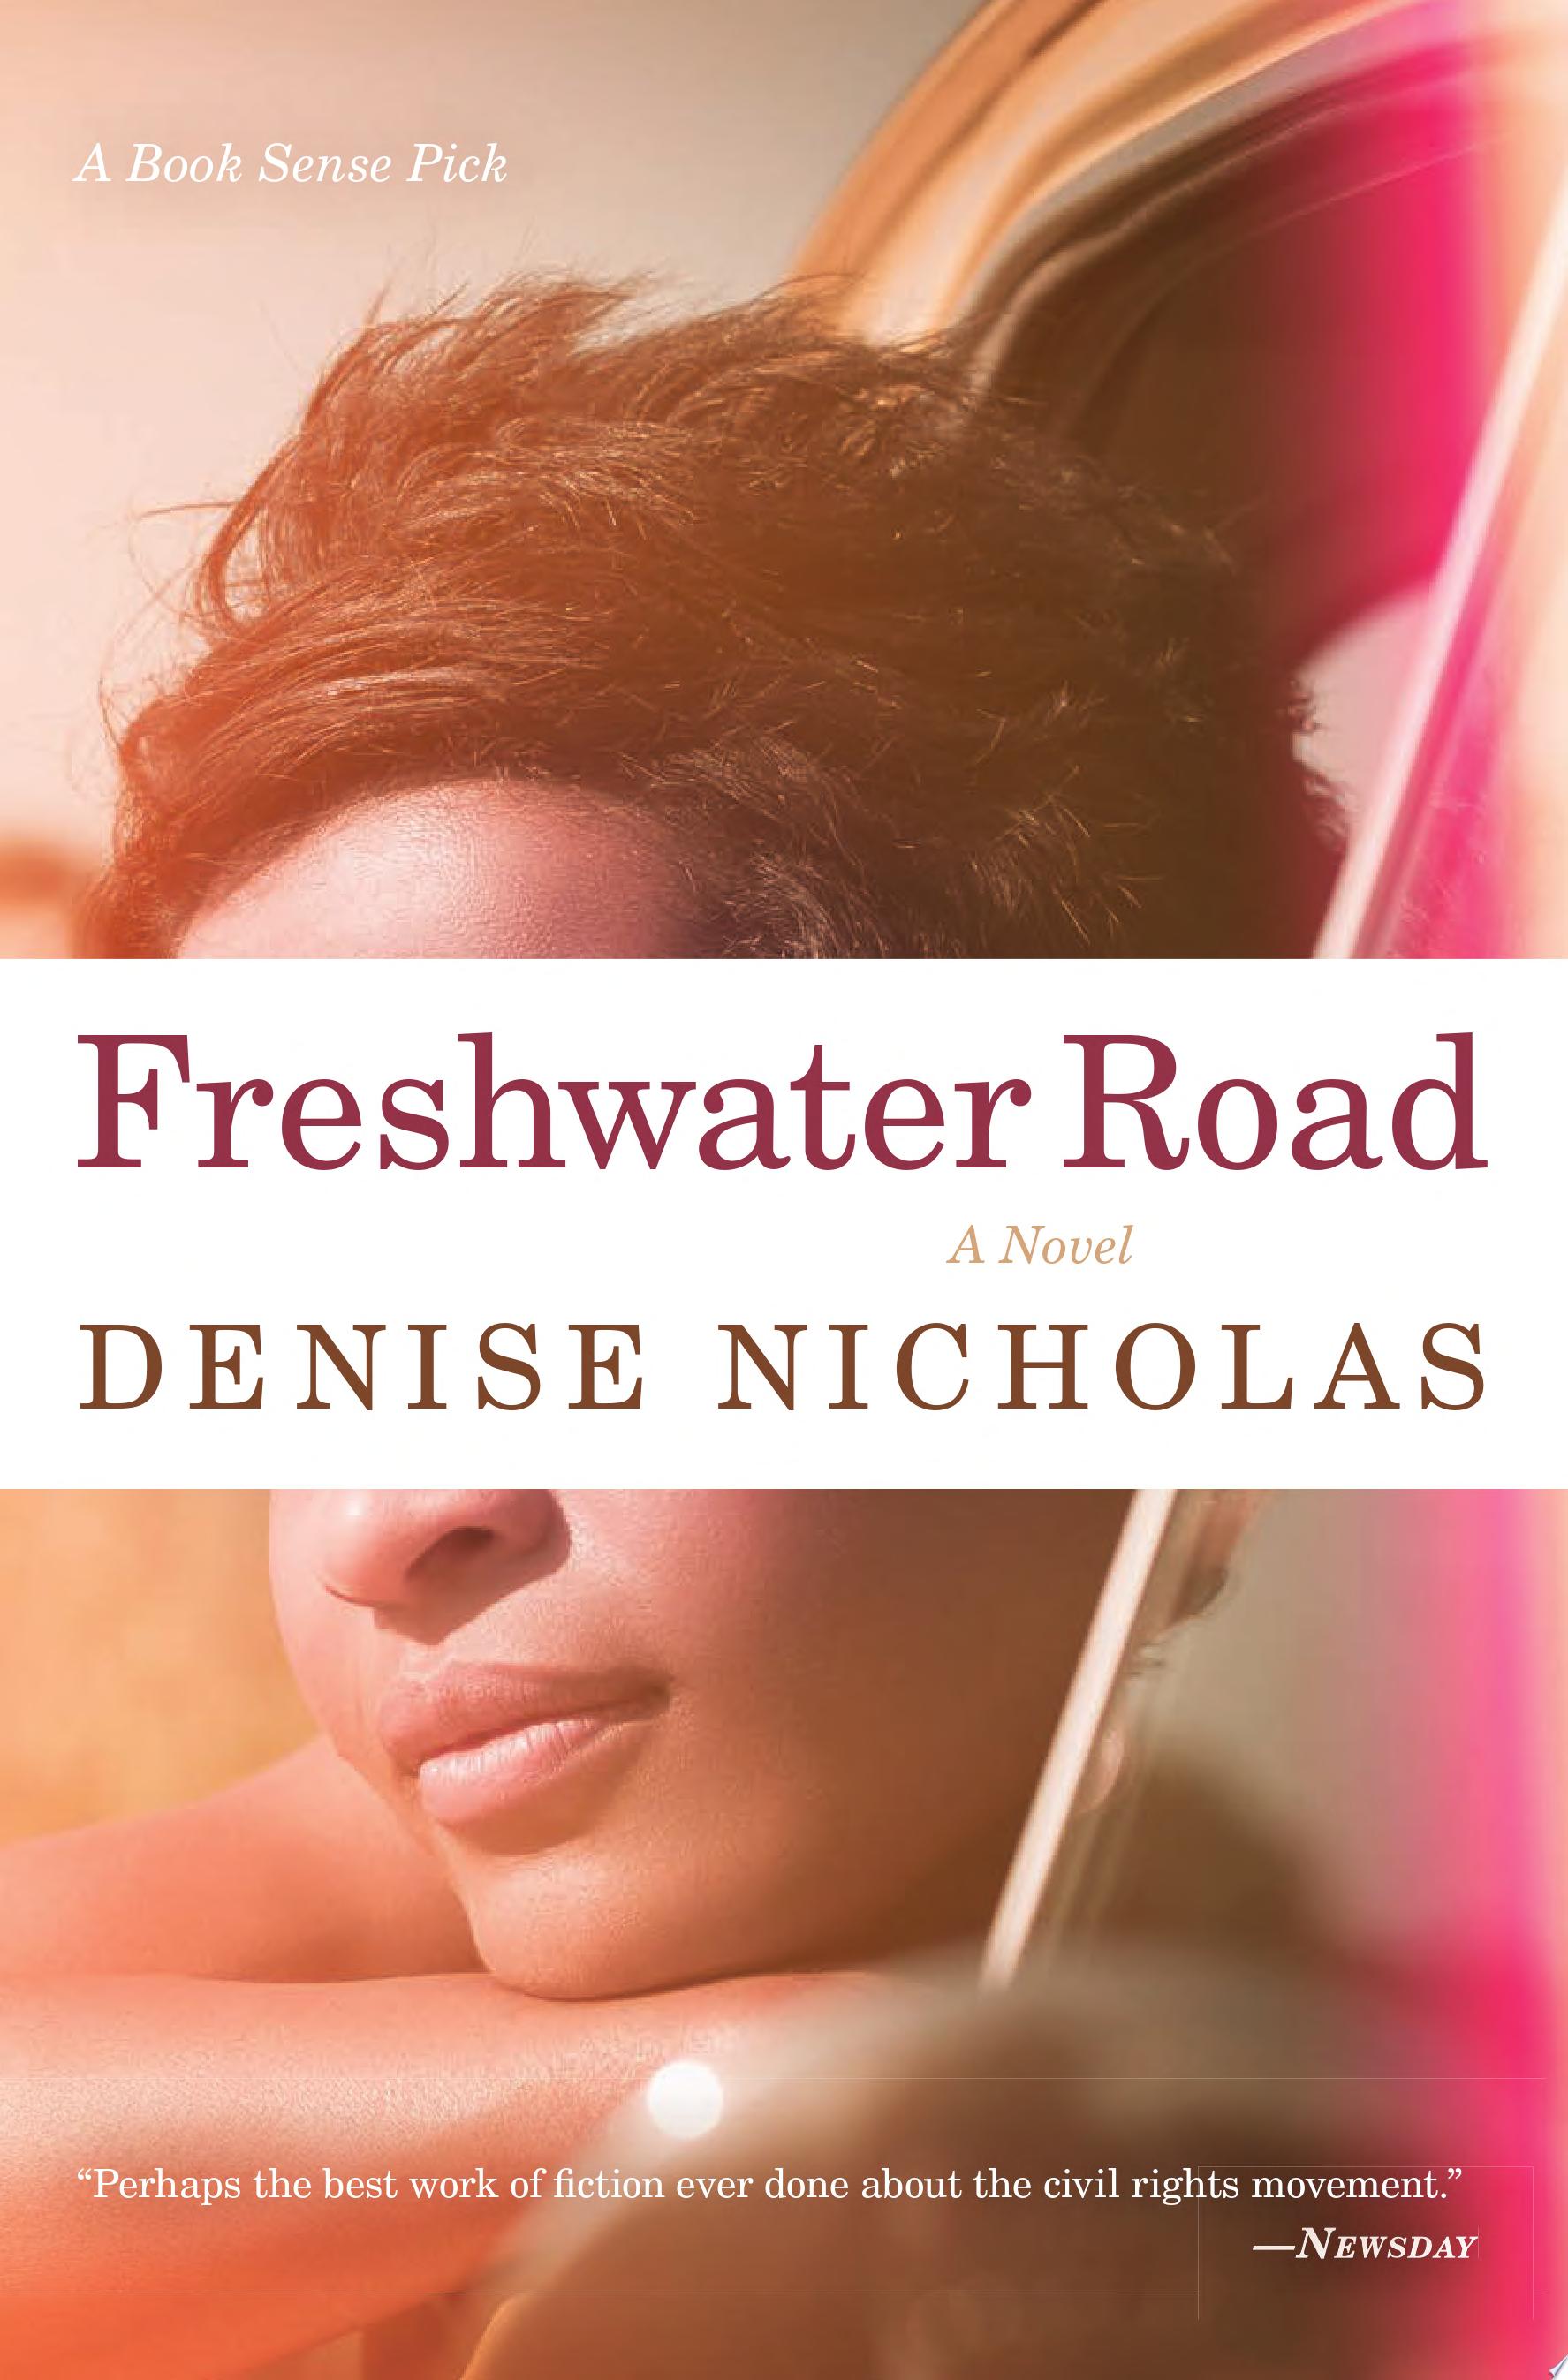 Image for "Freshwater Road"